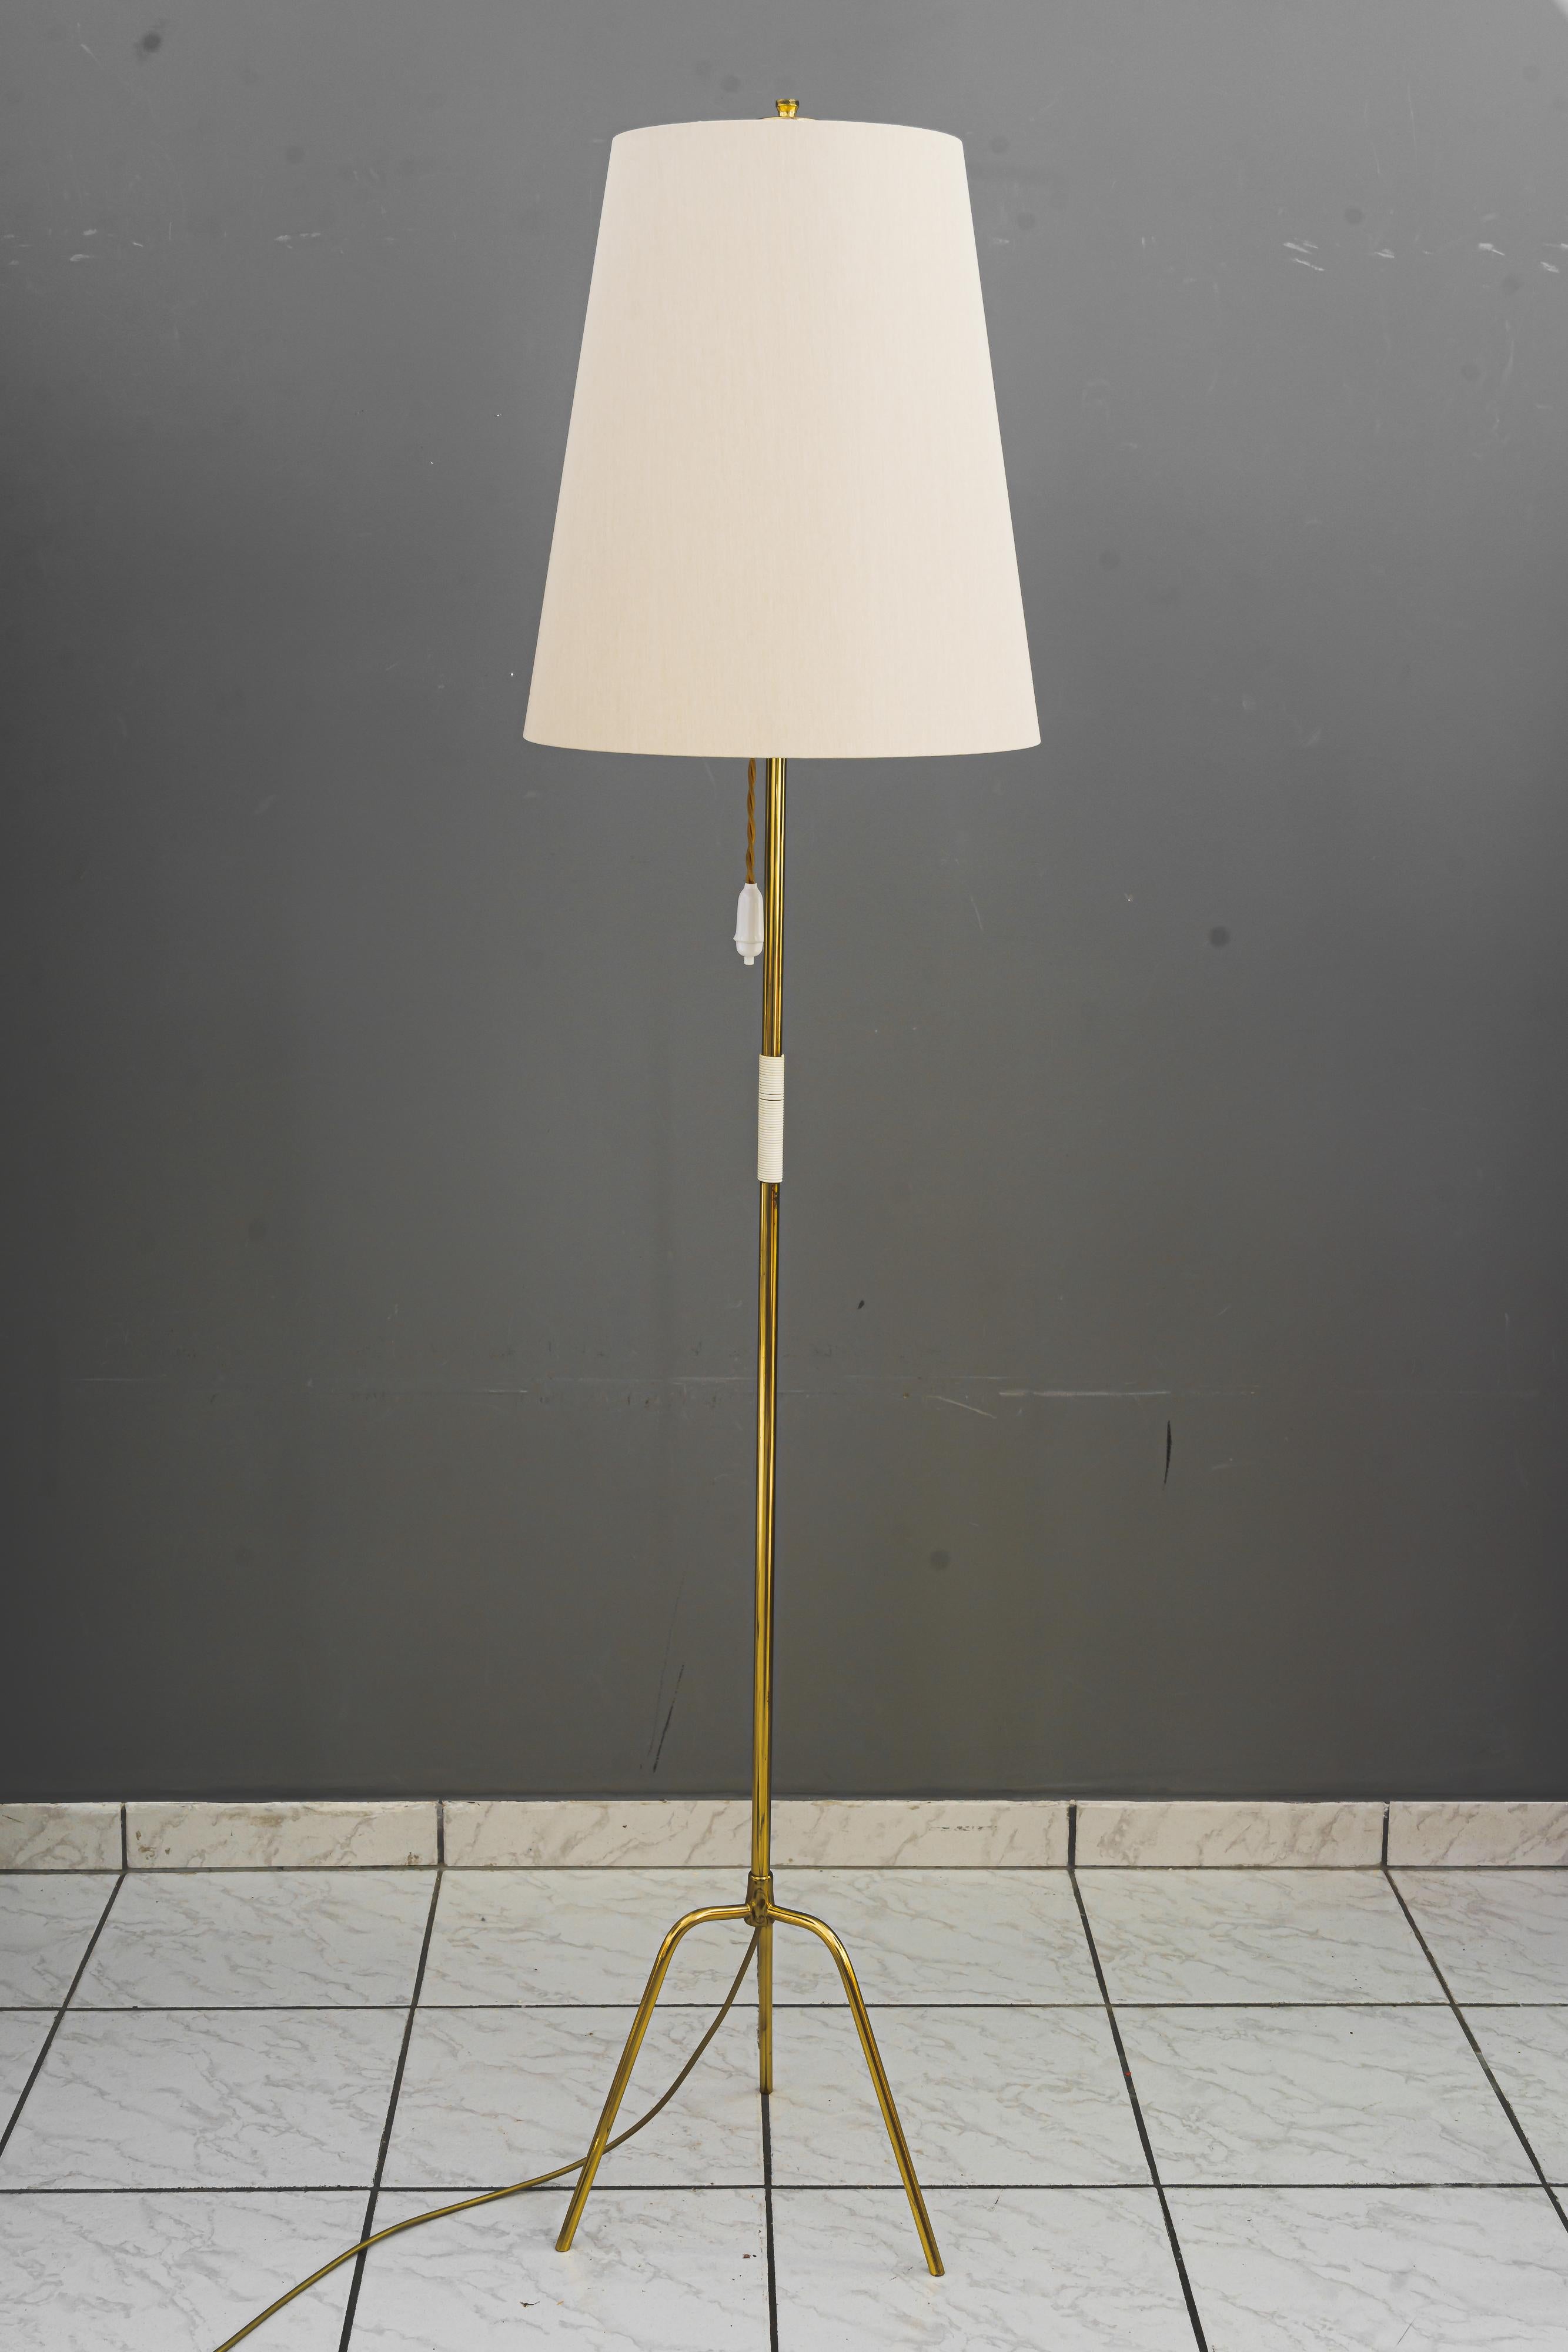 Rupert Nikoll floor lamp vienna around 1950s.
Original condition.
Only the shade is replaced ( new ).